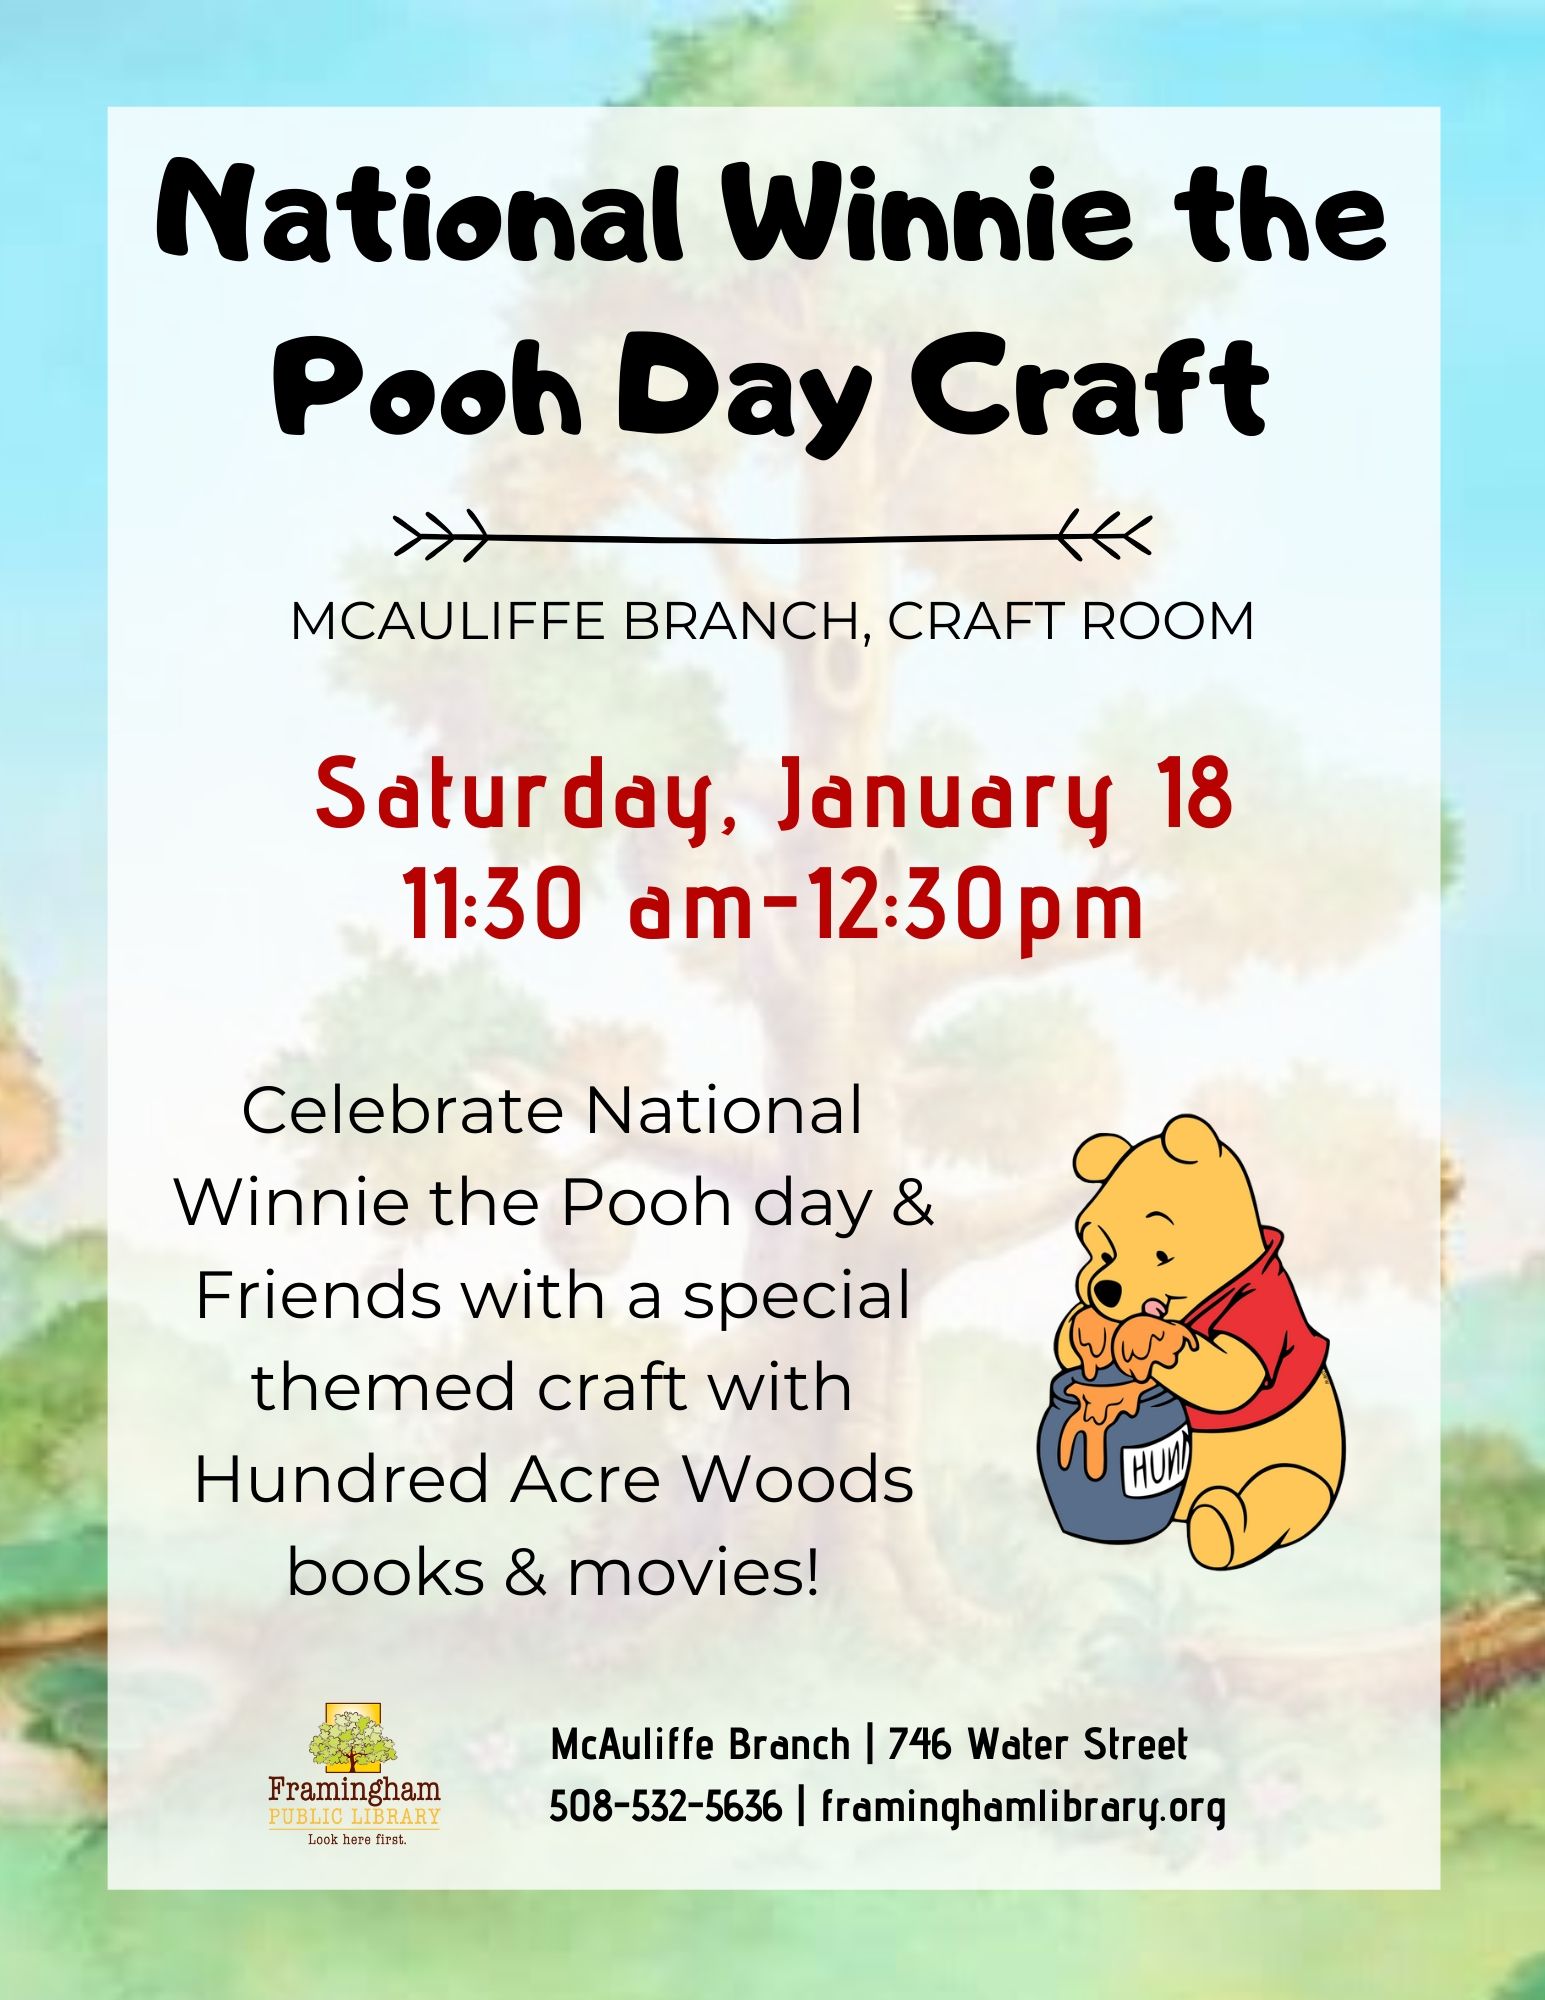 National Winnie the Pooh Day Craft thumbnail Photo